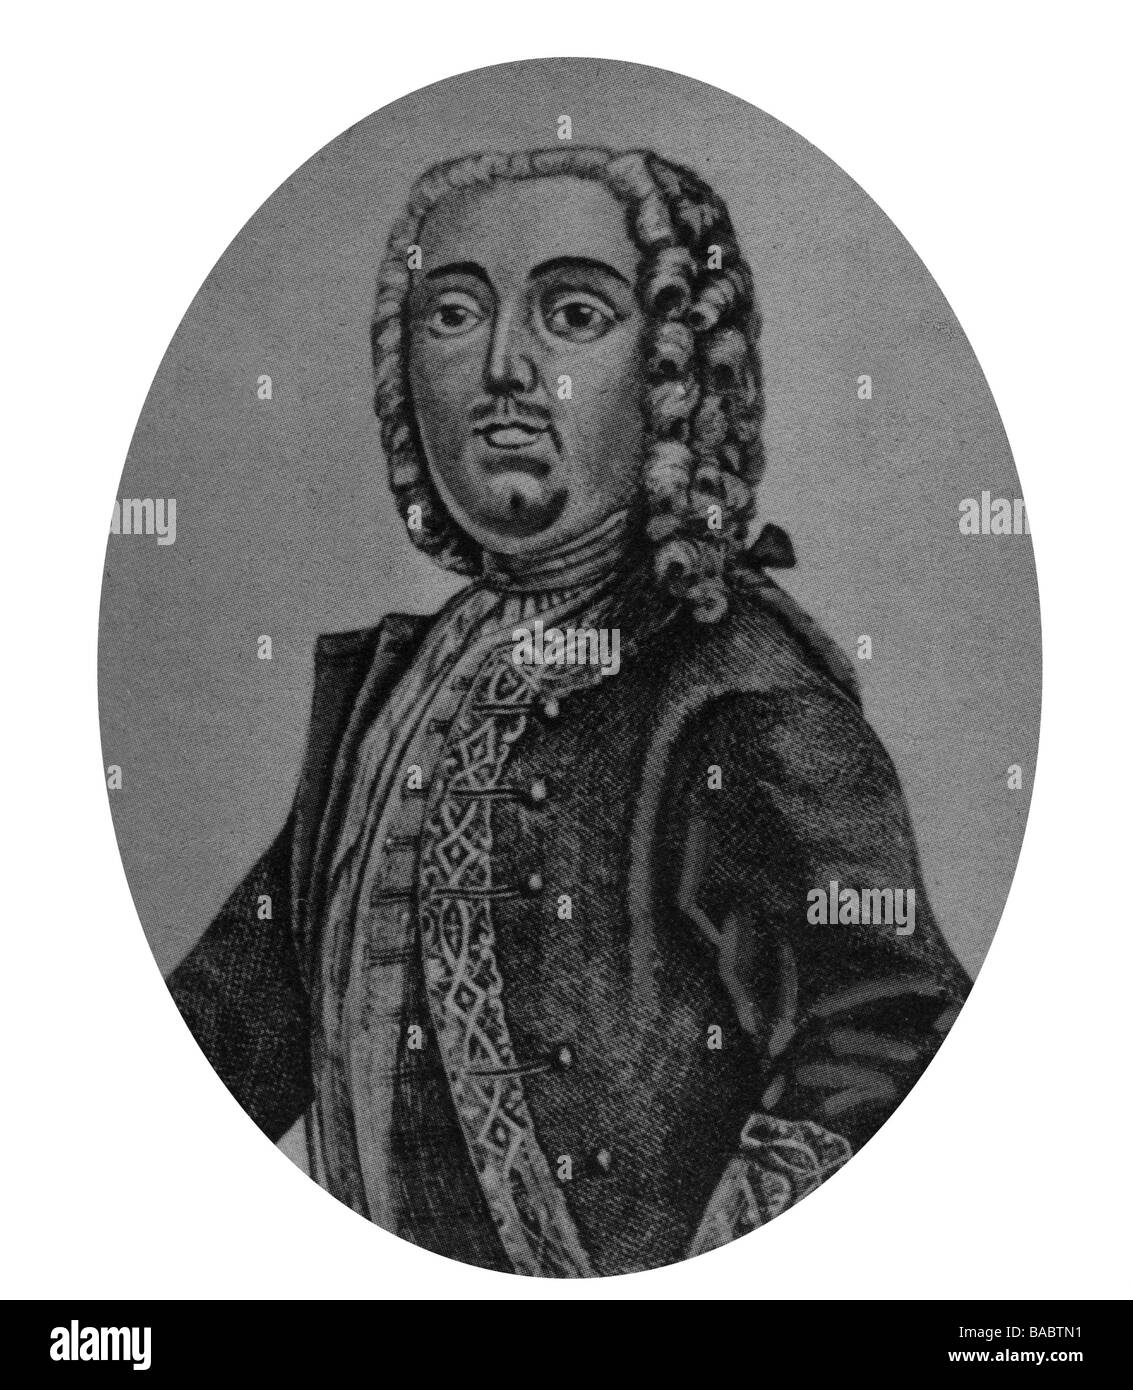 Süss Oppenheimer, Joseph 'Jud Süss', 1692 or 1698/1699 - 4.2.1738, privy finance council of Wuerttemberg and 'court Jew' 1733 - 1737, portrait, after contemporary image, 18th century, Stock Photo